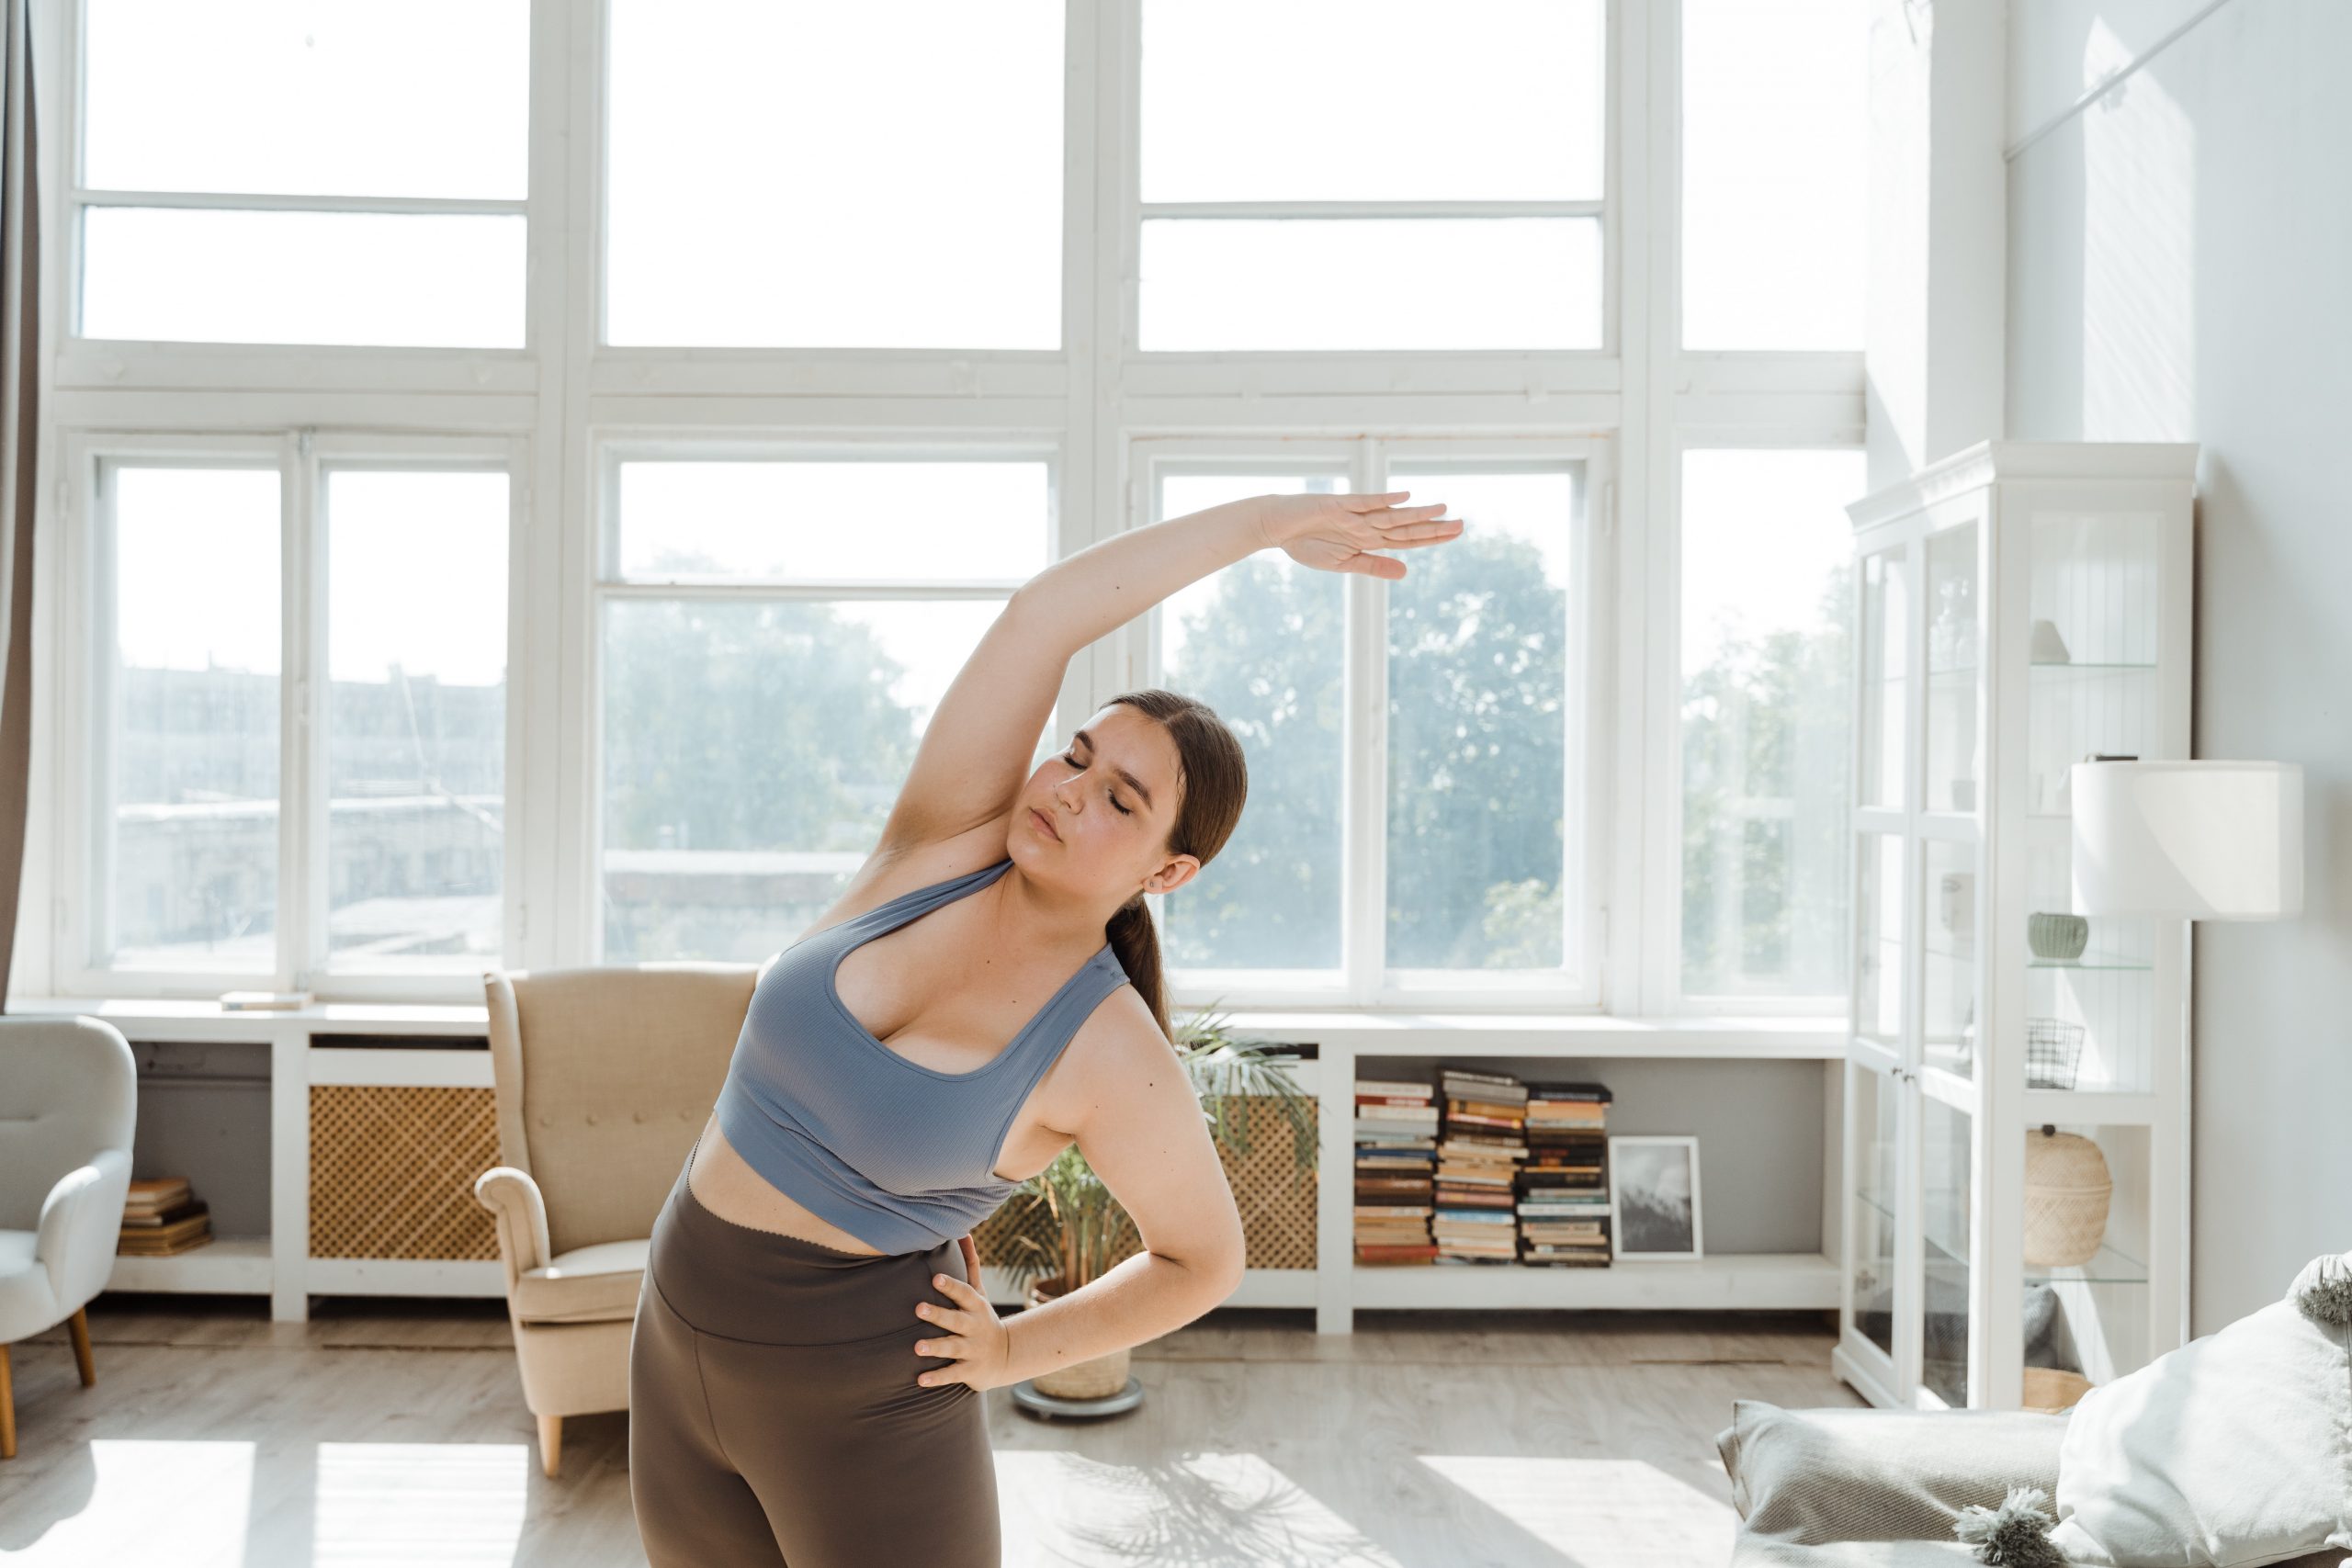 A young woman doing a home workout with daylight streaming through the windows.